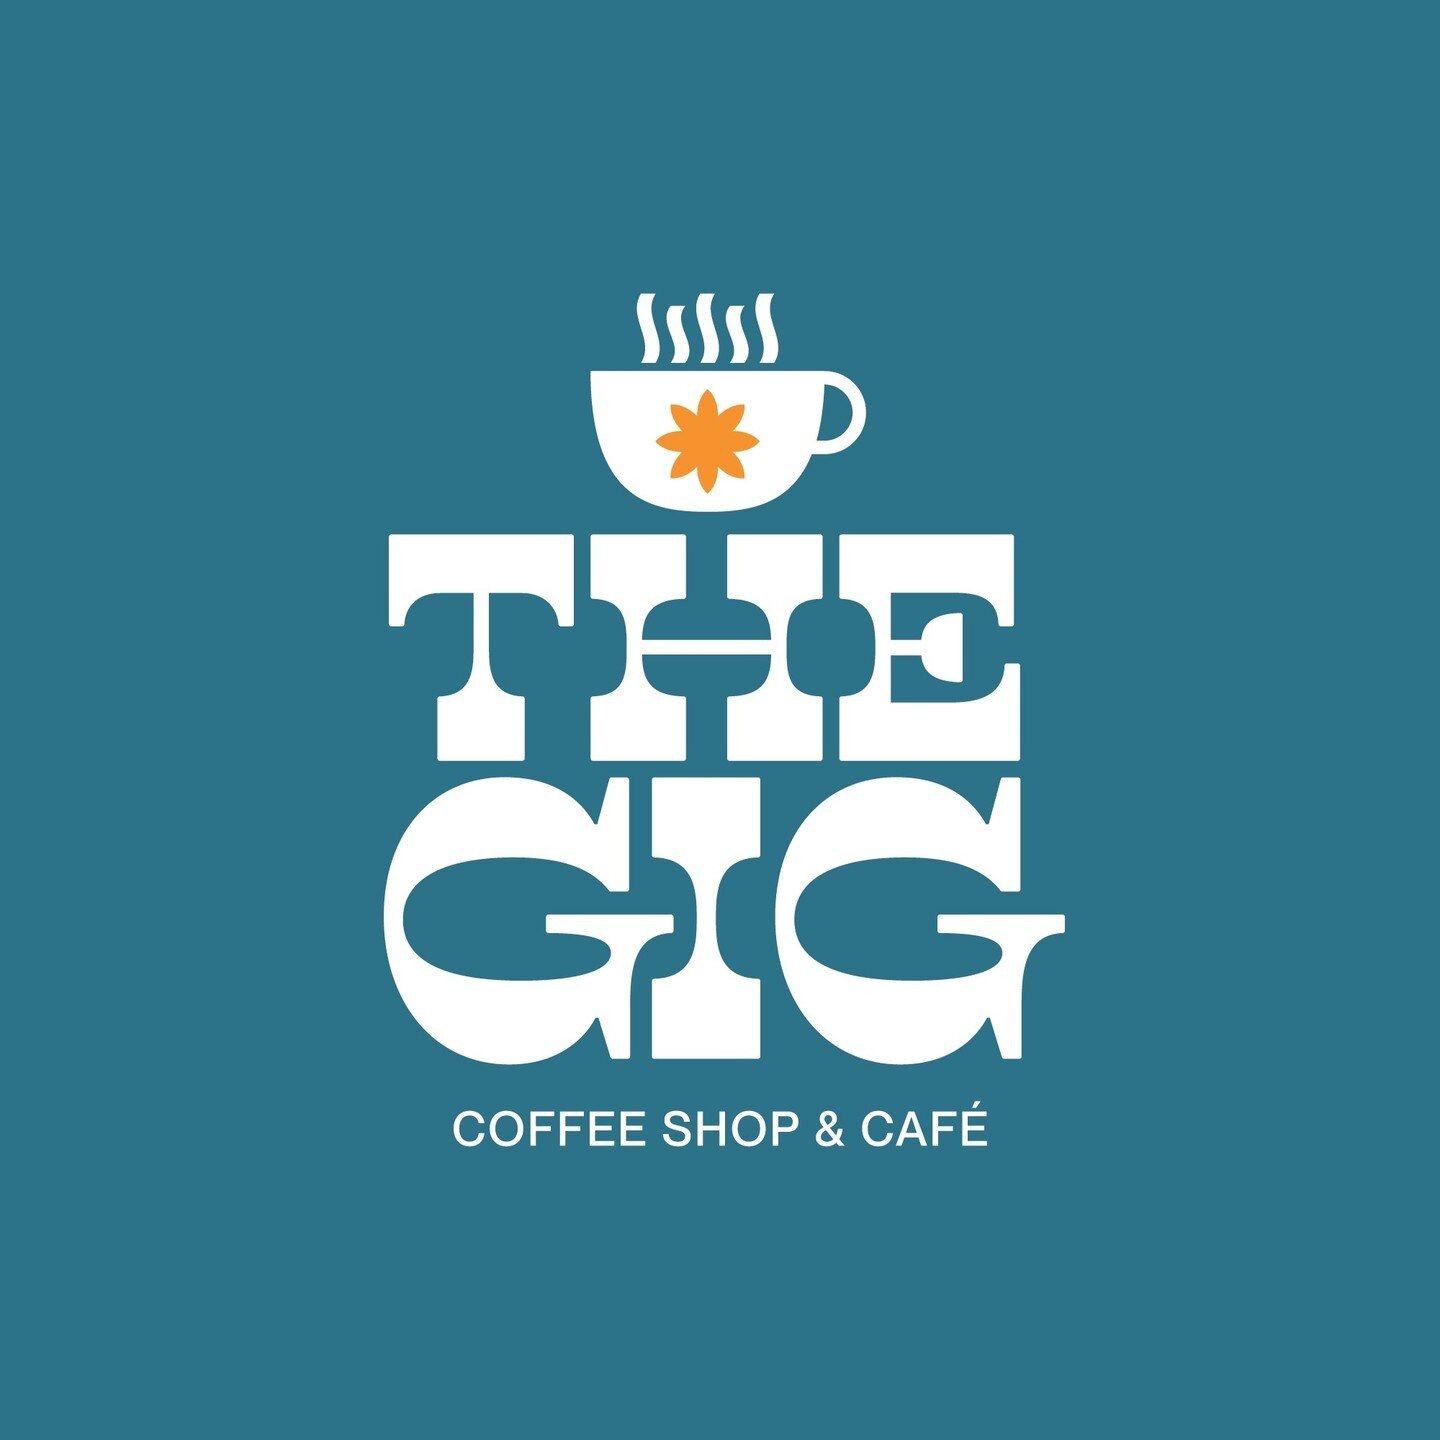 Dear Gig community,⁠
⁠
It is with a blend of gratitude and nostalgia that we announce the closure of The Gig coffee shop on February 29, 2024. We want to express our sincere appreciation to each and every one of our patrons who made The Gig a vibrant